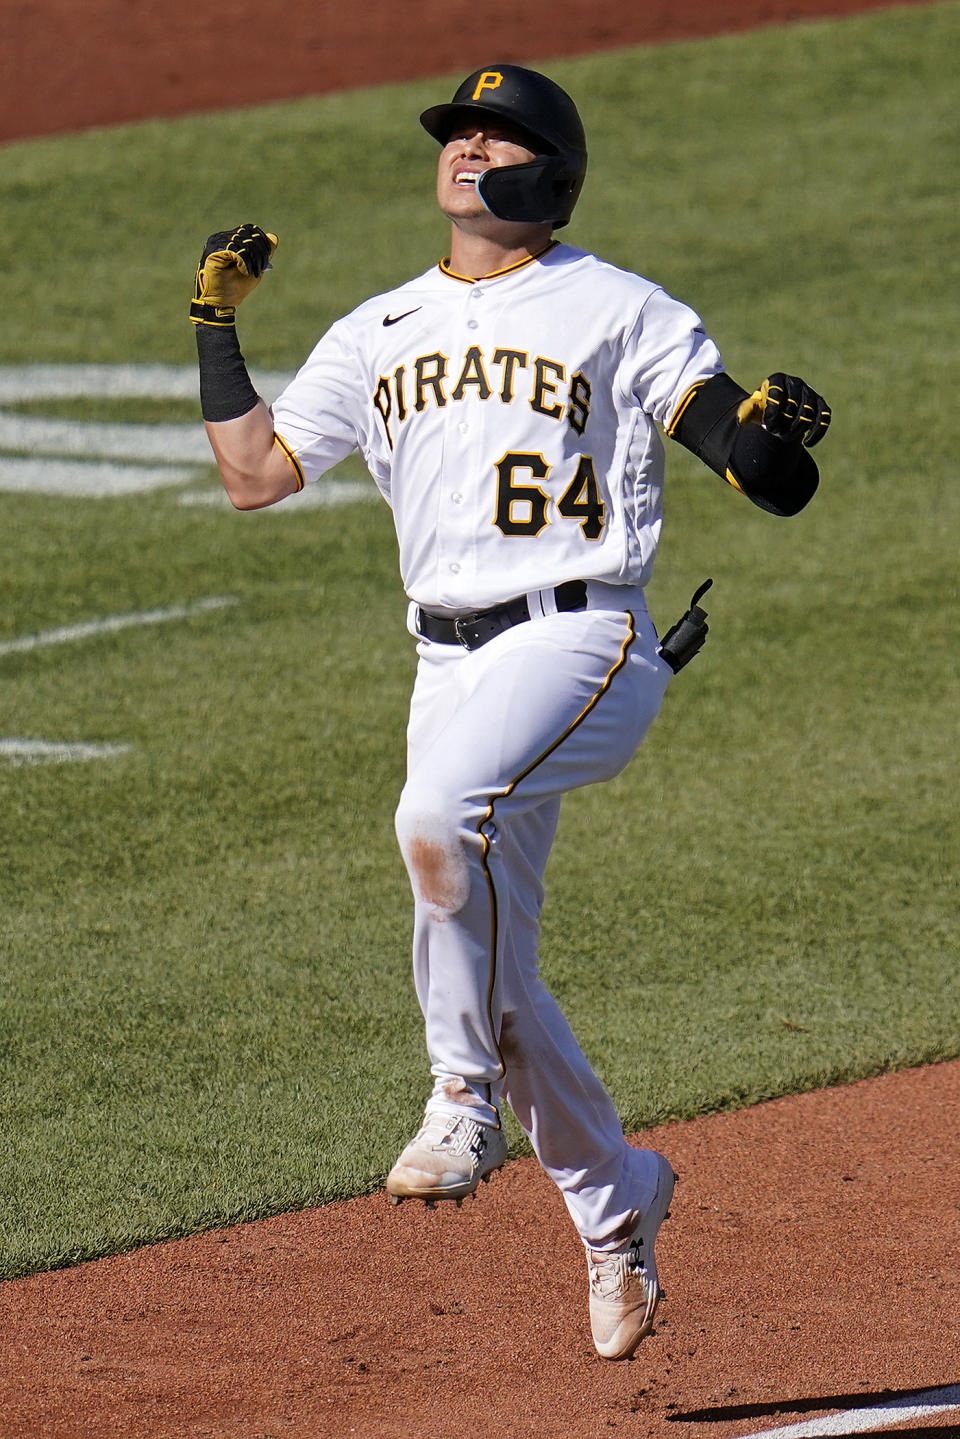 Pittsburgh Pirates' Diego Castillo celebrates as he approaches home plate after hitting a three-run home run off San Francisco Giants starting pitcher Alex Wood during the third inning of a baseball game in Pittsburgh, Saturday, June 18, 2022. (AP Photo/Gene J. Puskar)